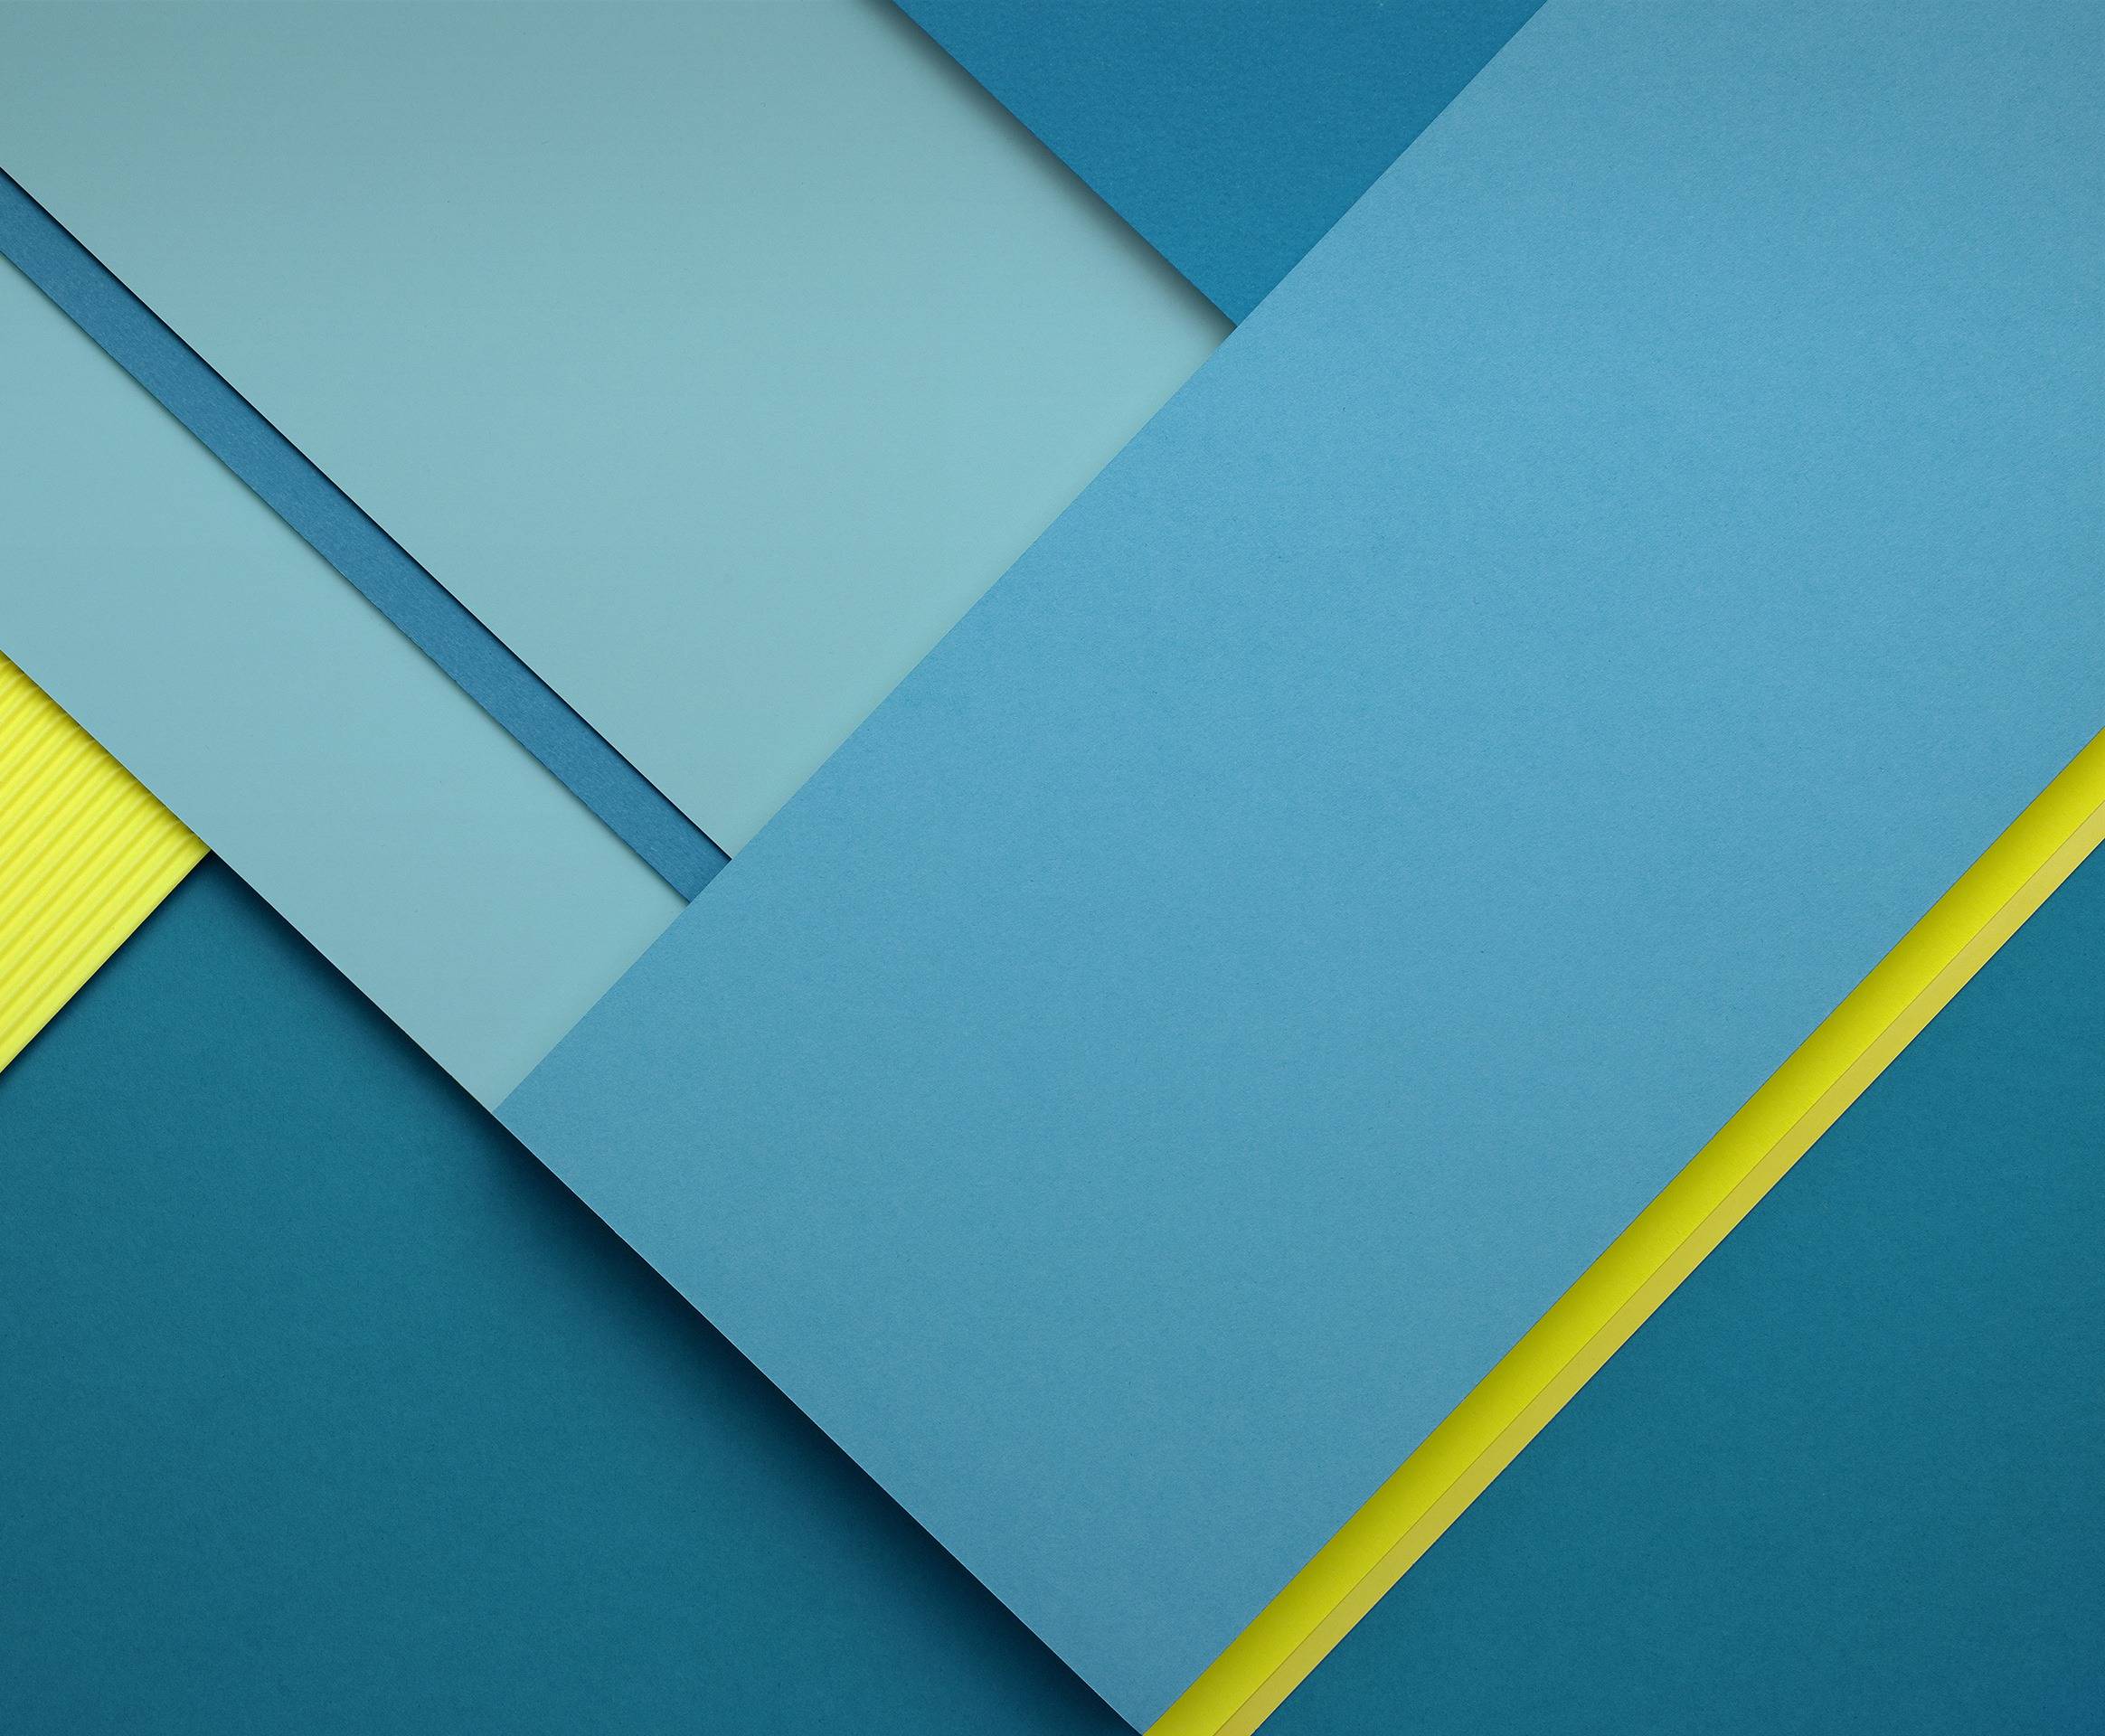 How to download official Android 5.0 Lollipop wallpaper